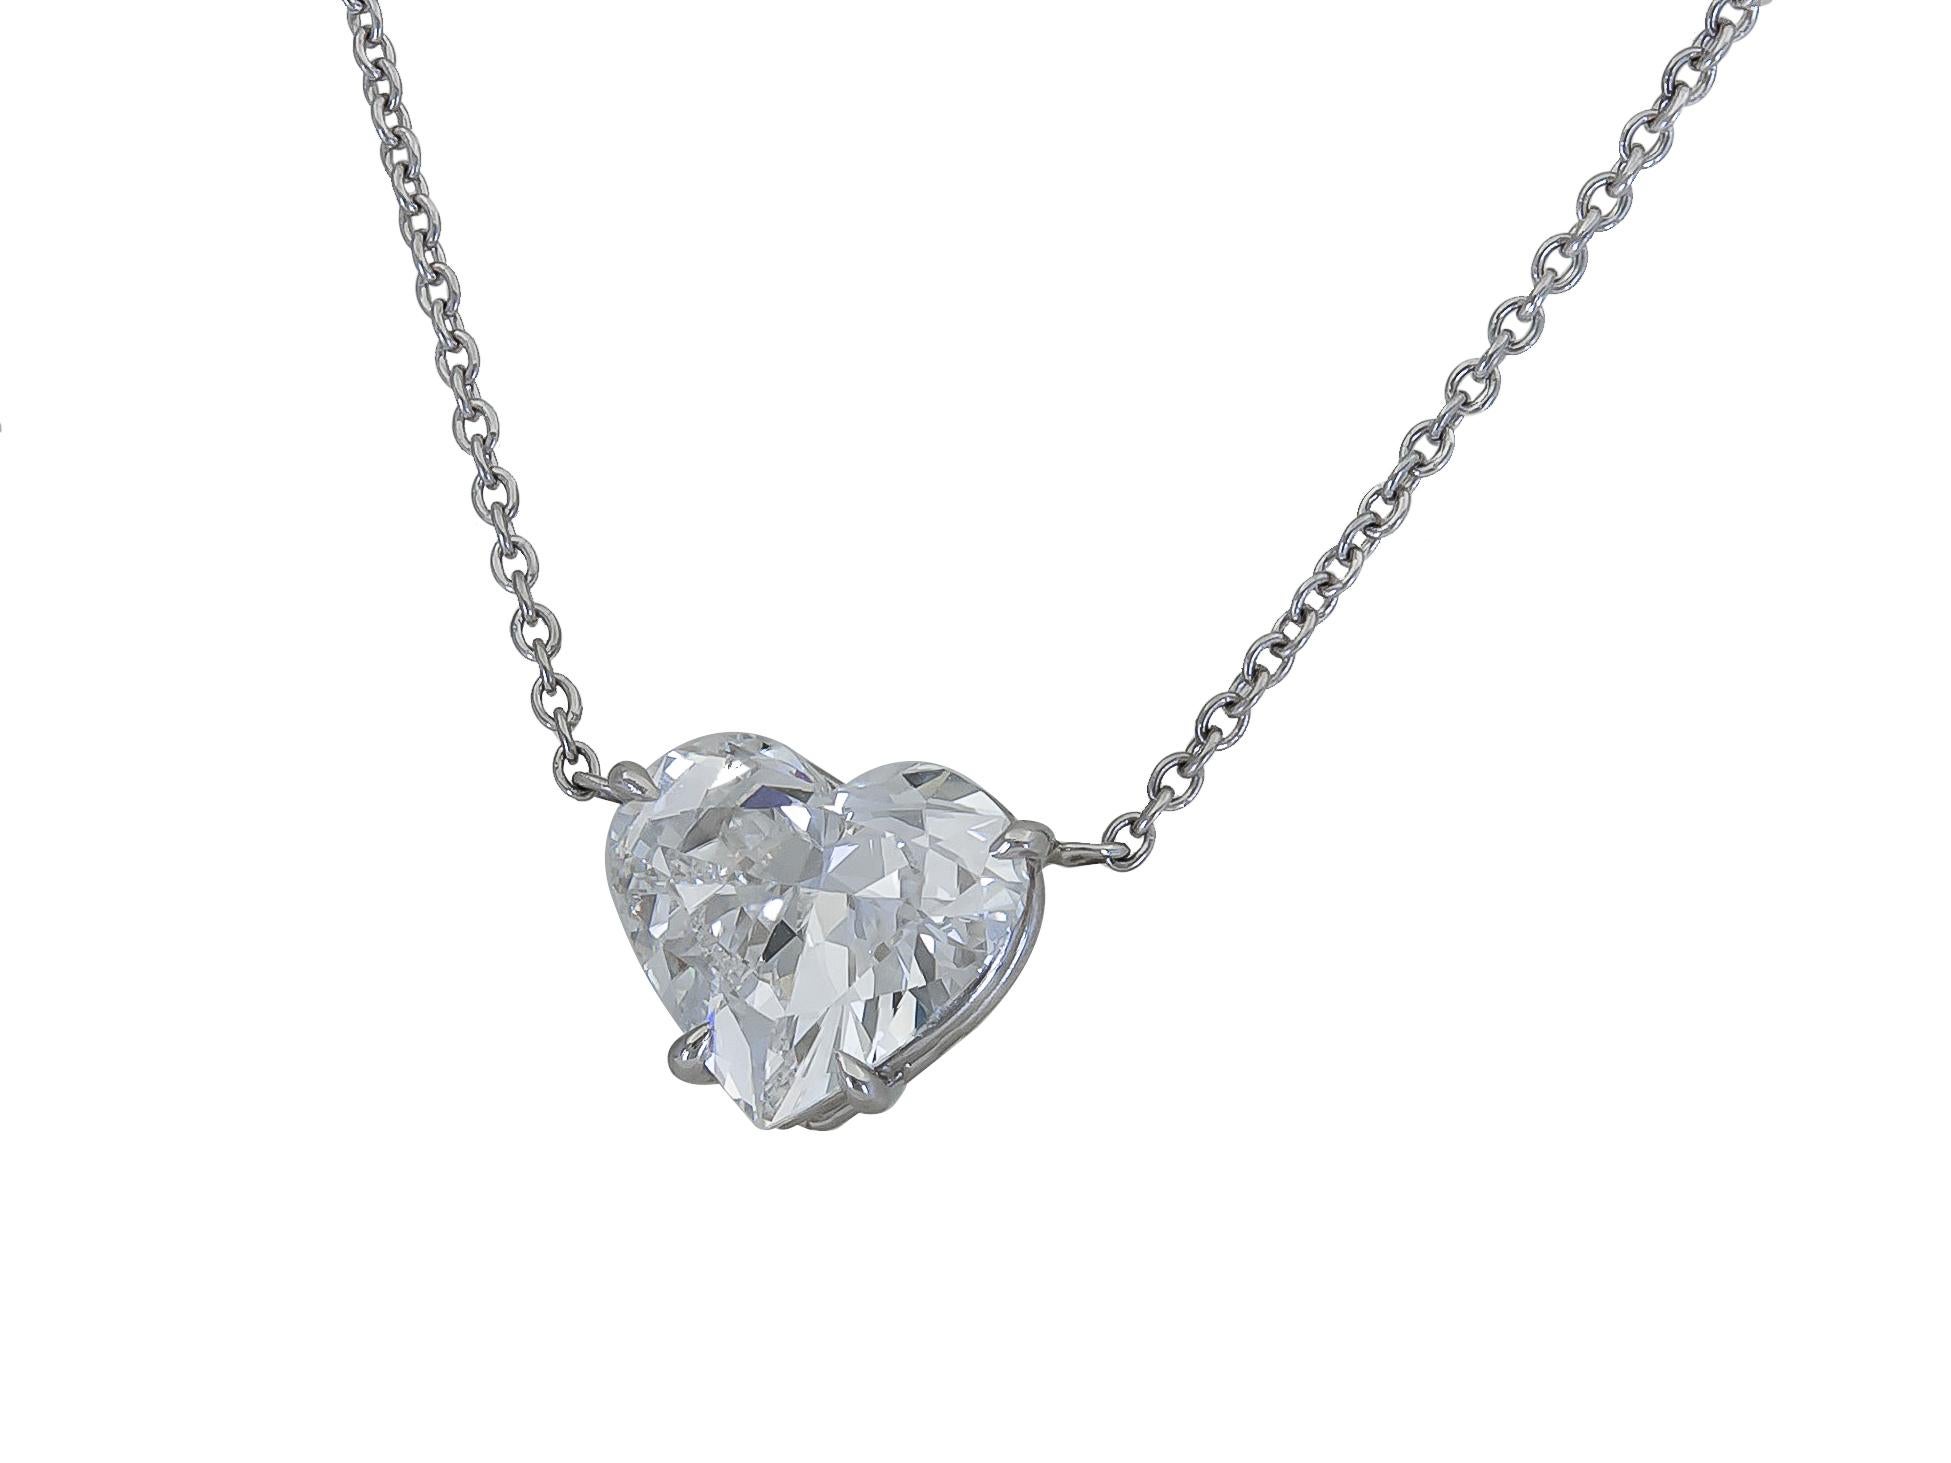 A classic and timeless pendant necklace showcasing a single heart shape diamond center, set in an 18k white gold mounting. Pendant suspended on a 15.5 inch white gold chain.
Diamond weighs 1.36 carats and is F color, VS1 clarity.
Pendant Dimensions: